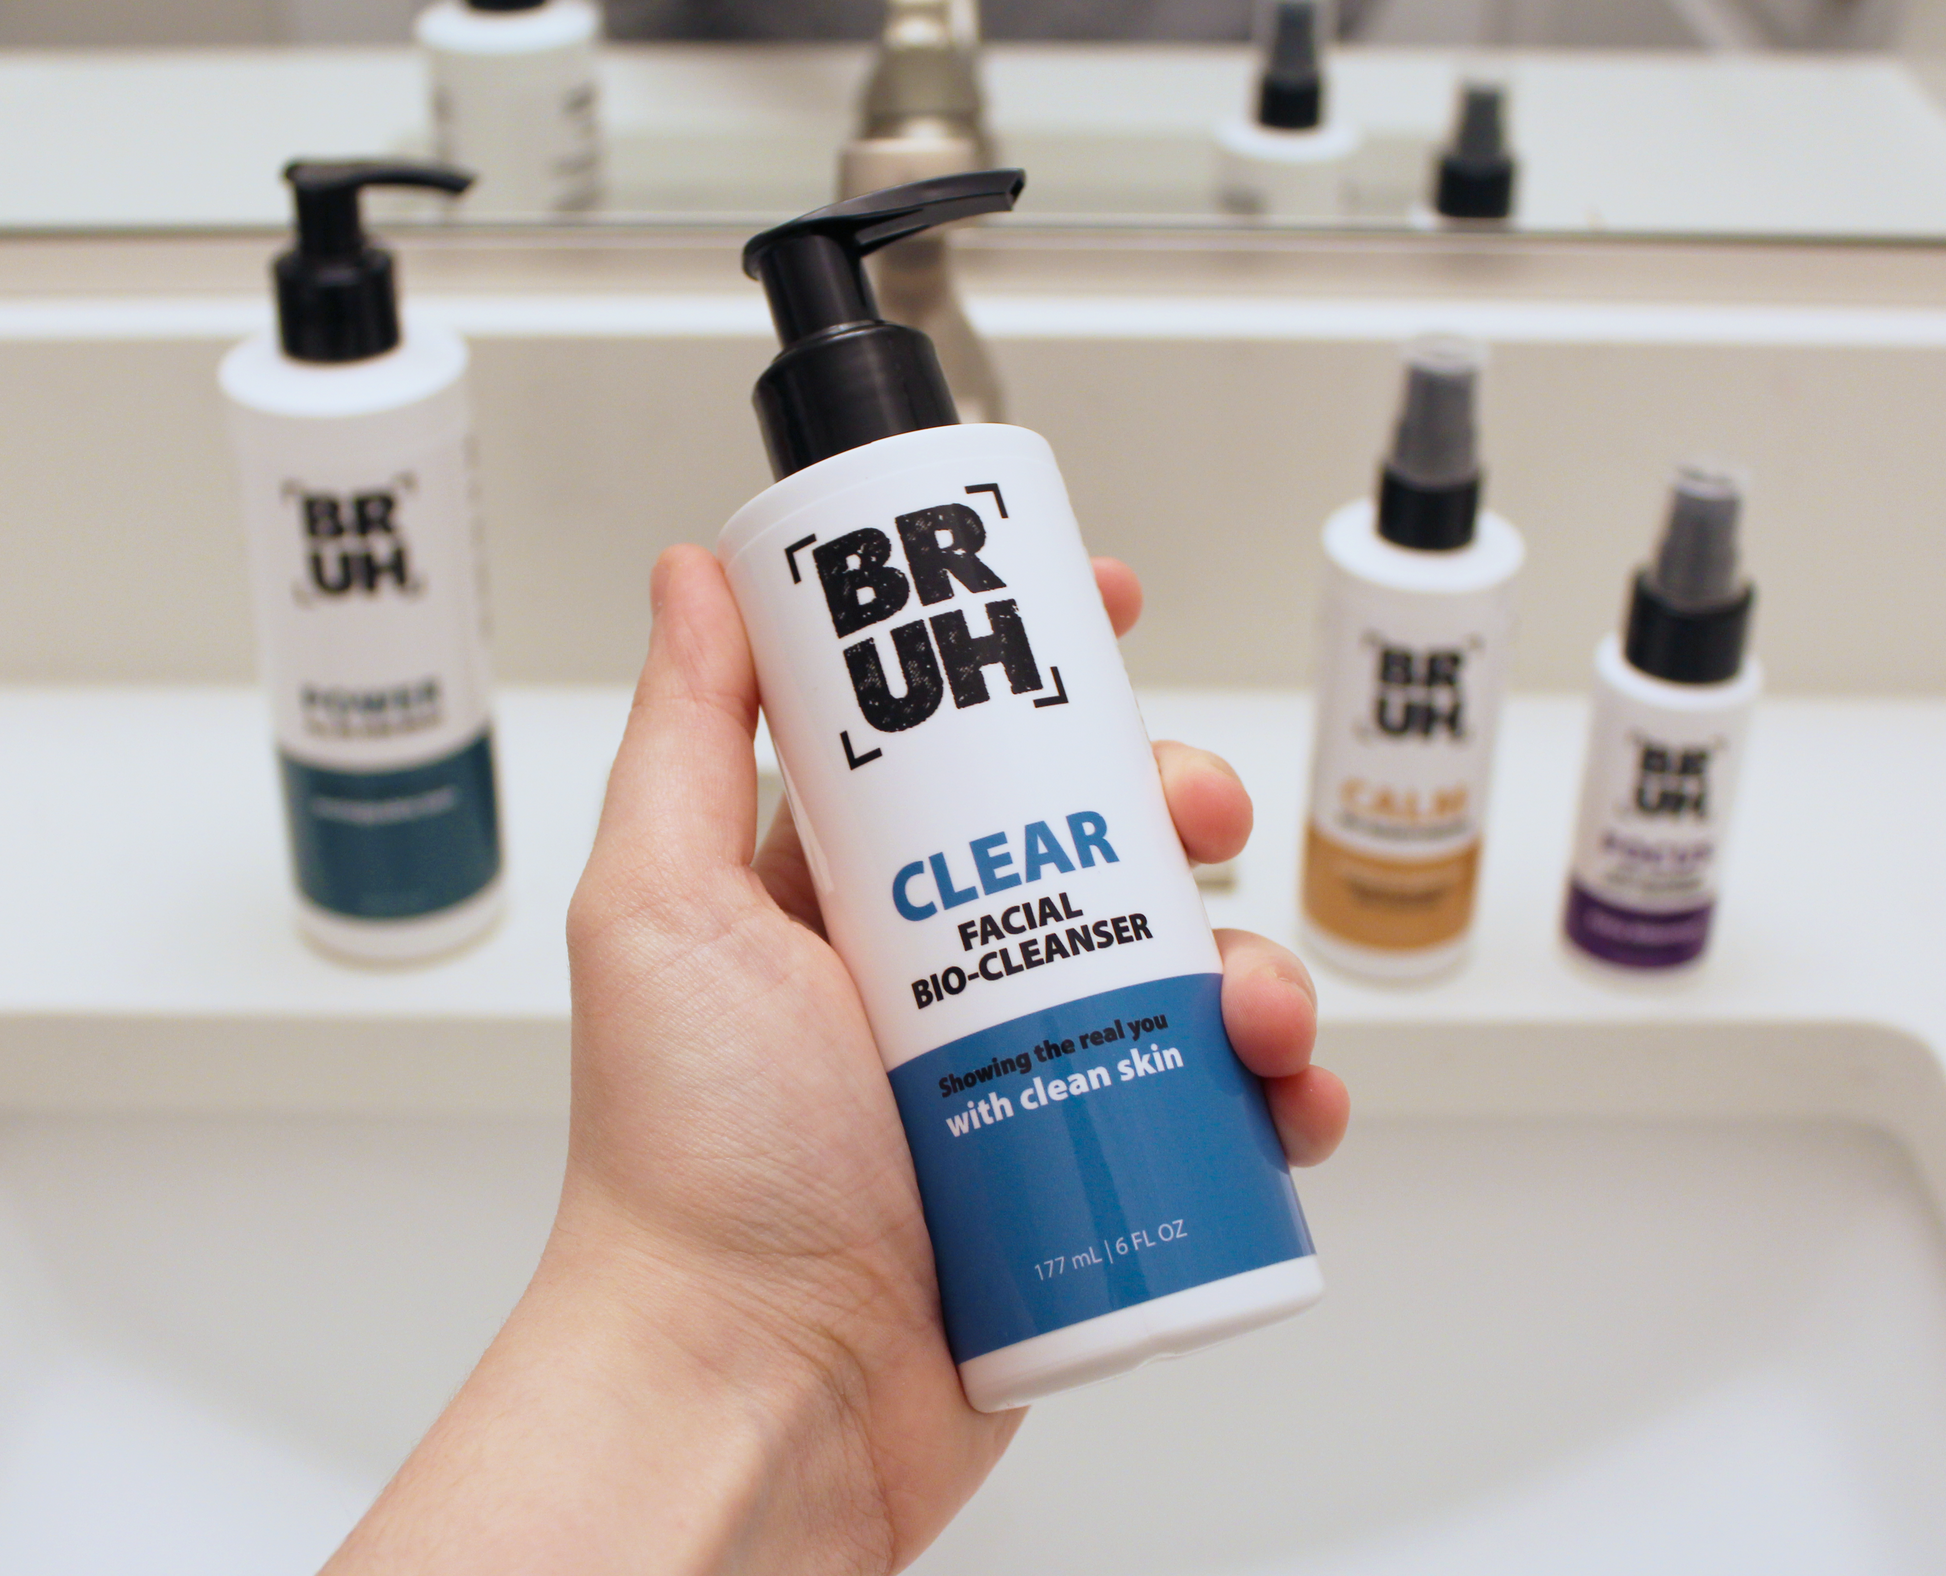 Clean and clear cleanser product review 